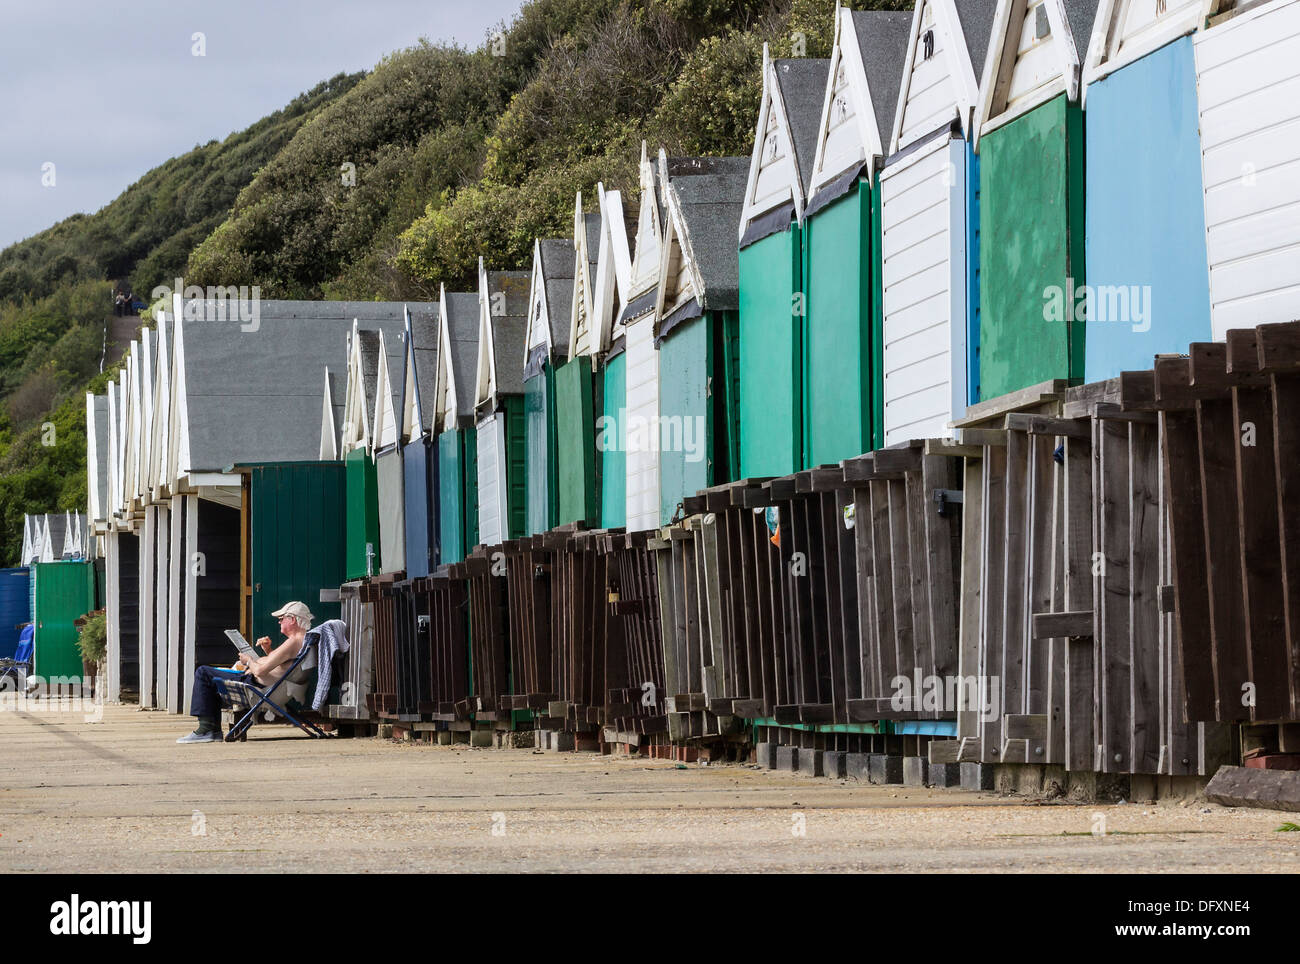 Beach Huts, closed out-of-season, Man relaxing alone in chair on Boscombe Promenade, Dorset, England, UK Europe Stock Photo